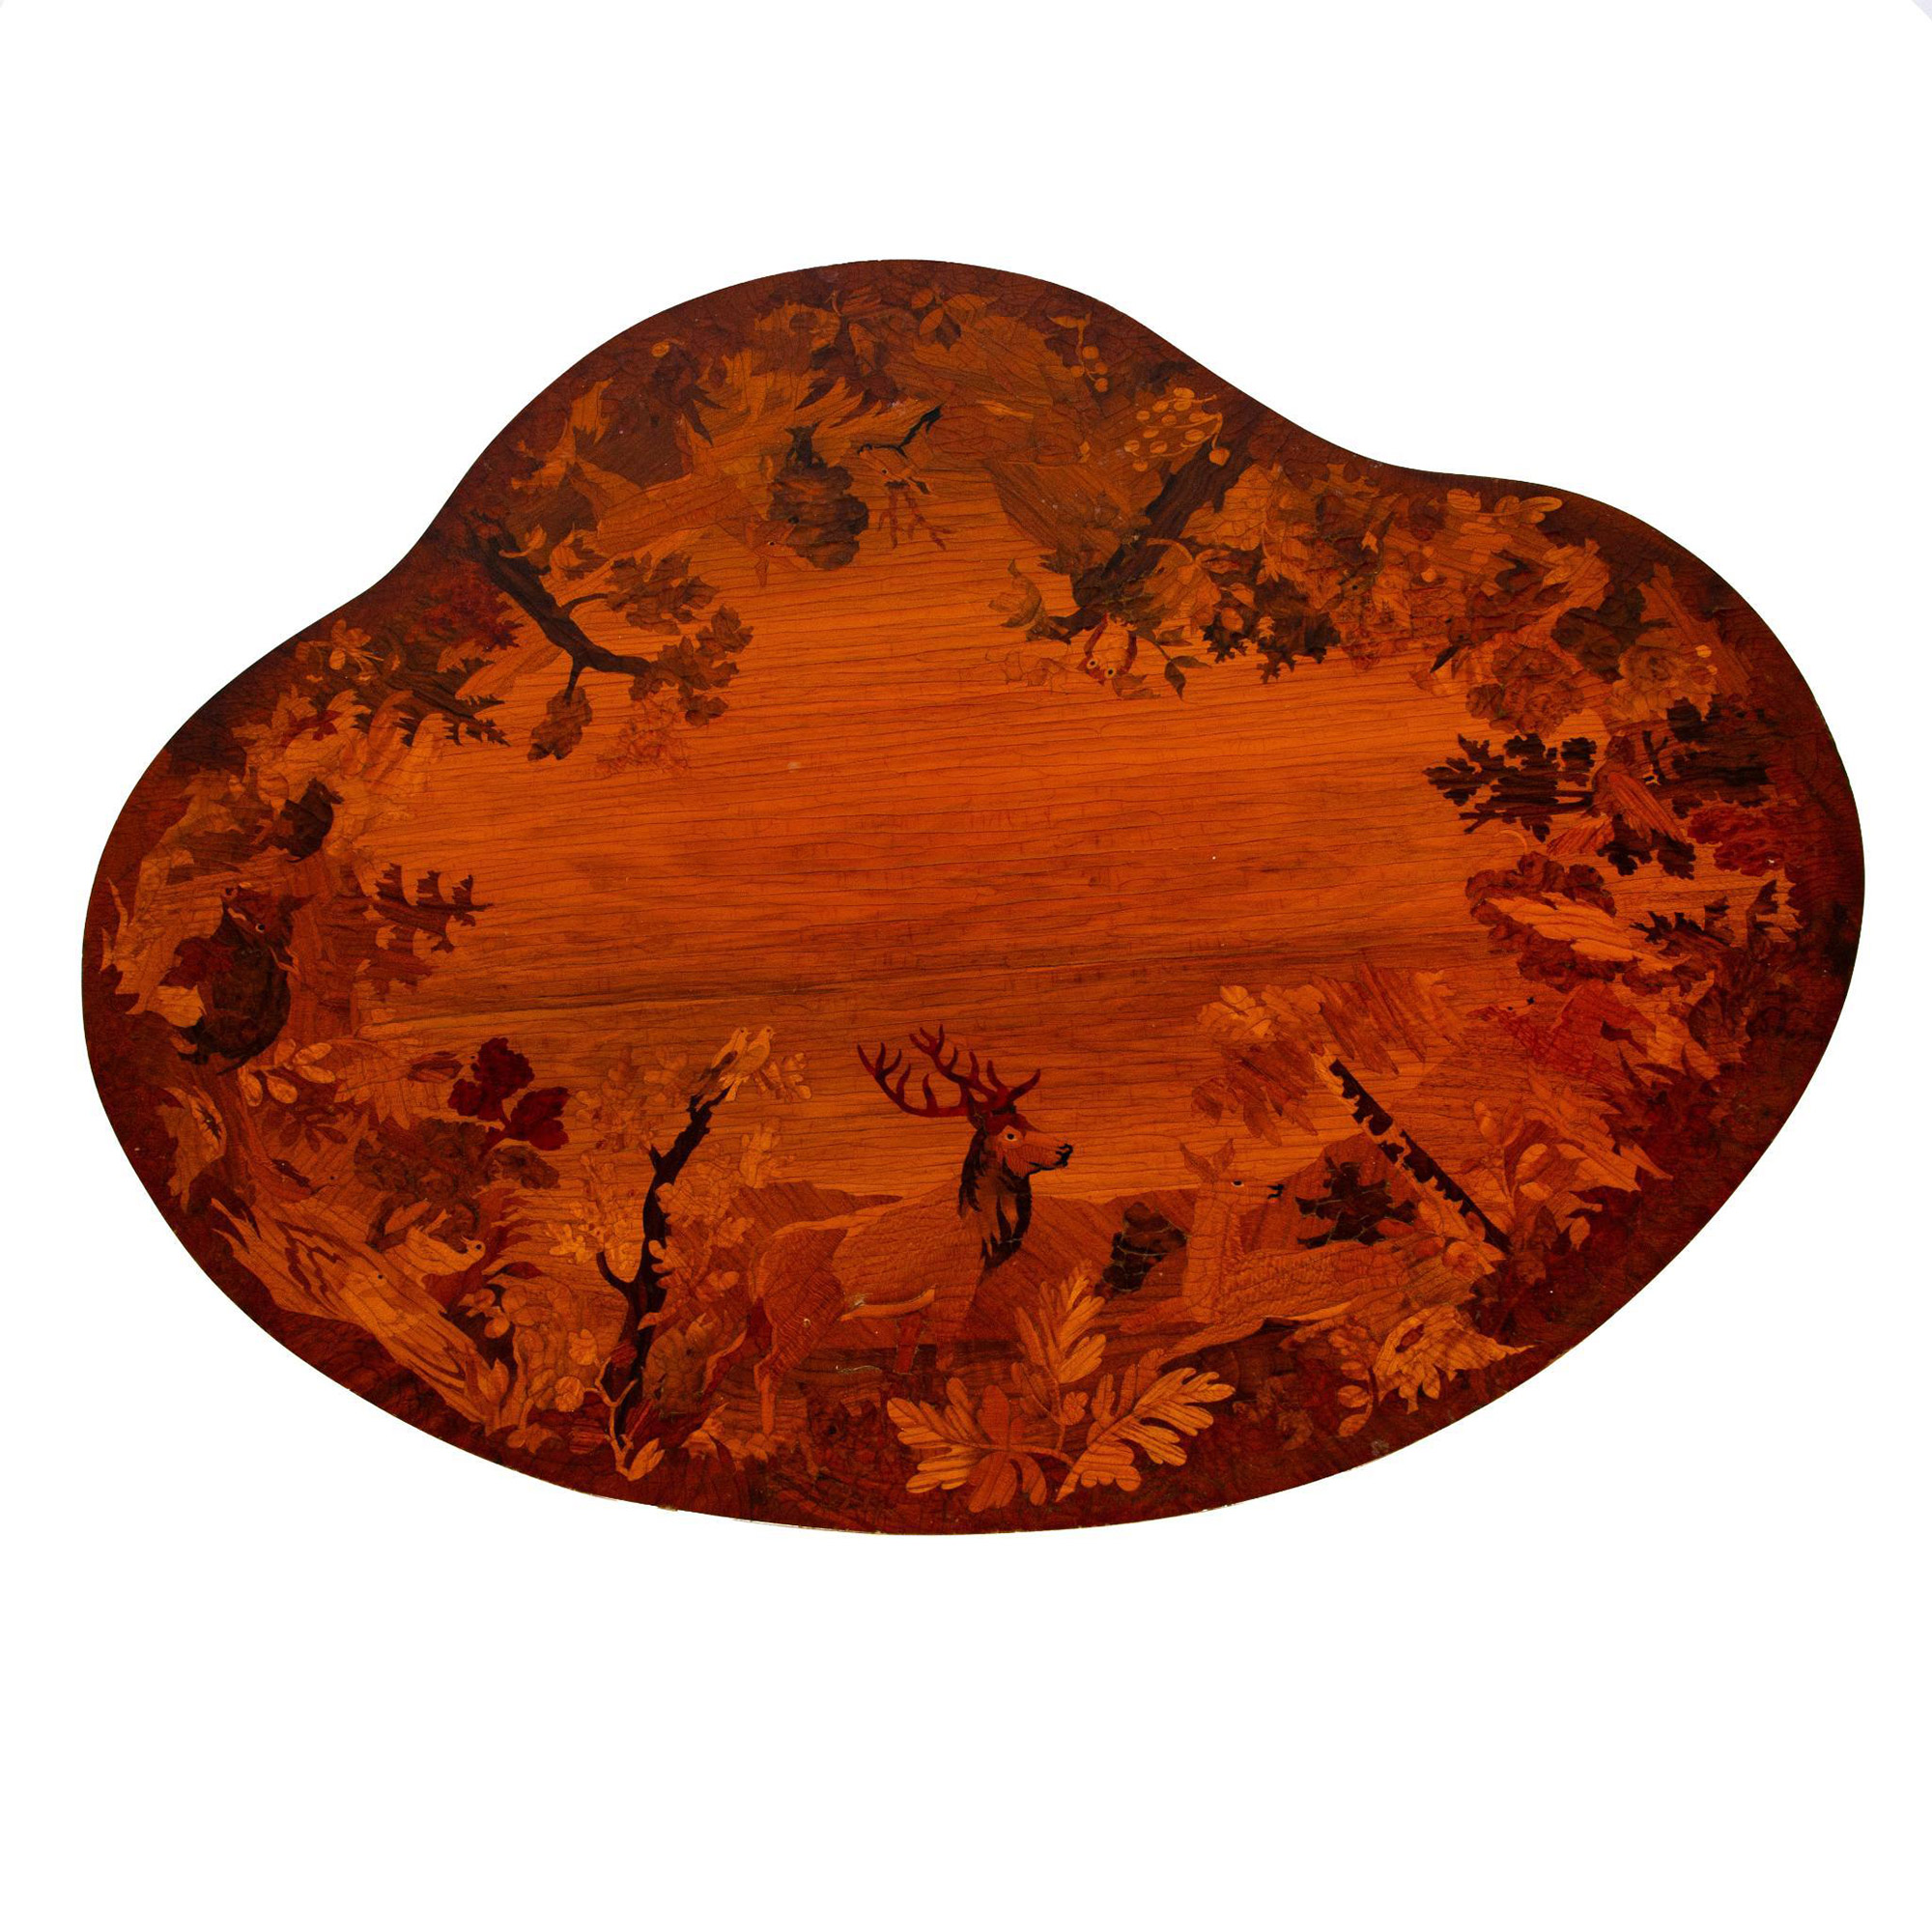 Buchschmid & Gretaux Inlaid Marquetry Coffee Table, Animals - Image 6 of 6